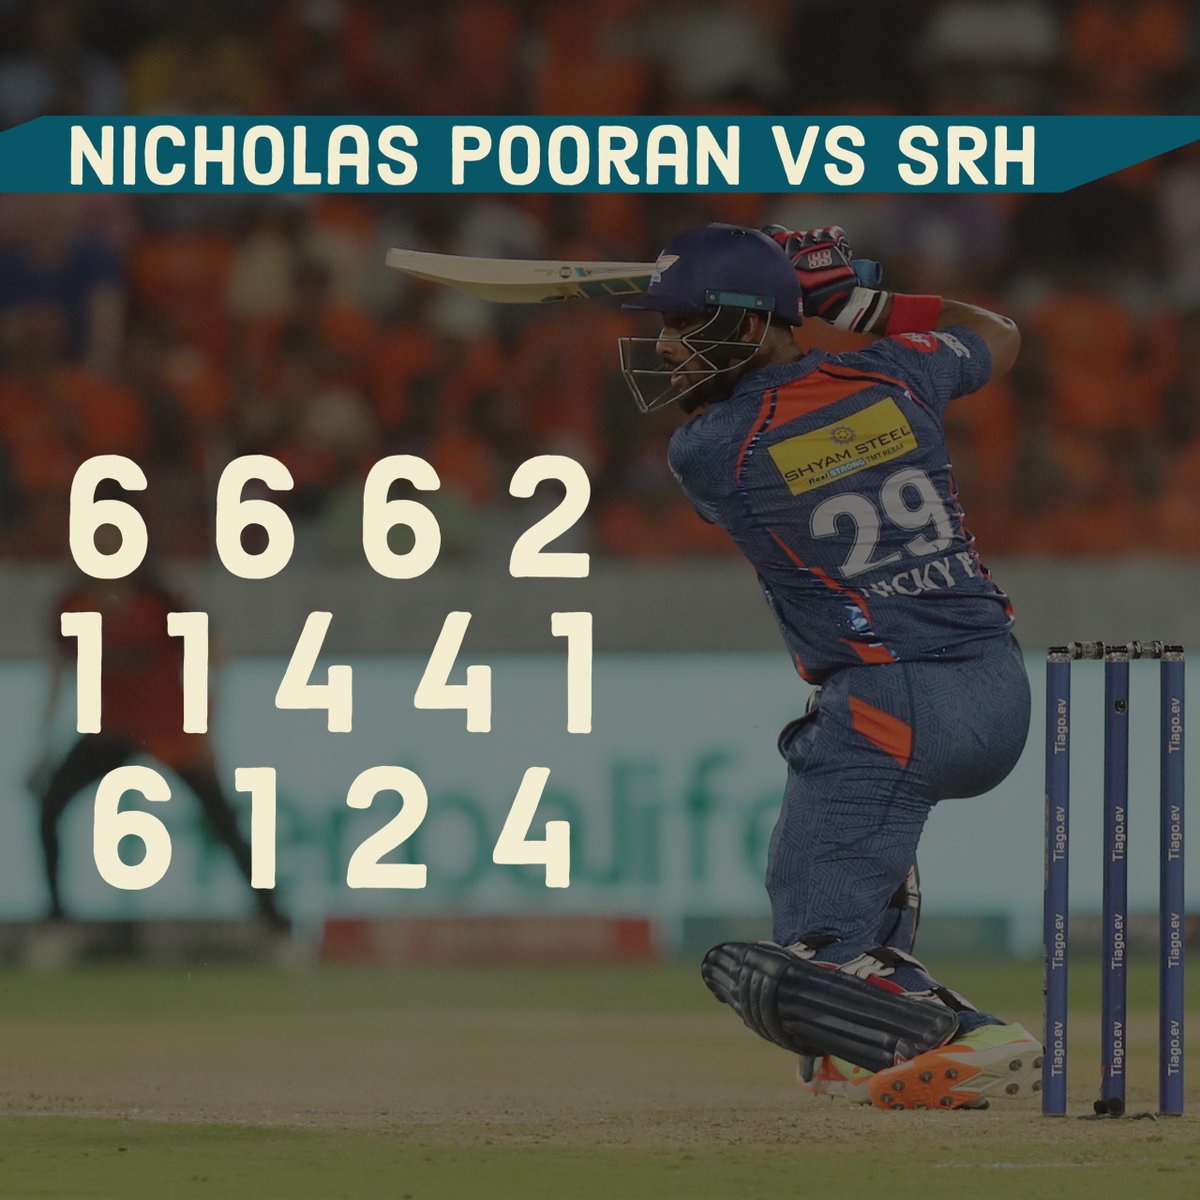 Nicholas Pooran stings SRH with 44* off 13 as LSG pull off an incredible victory to move up to fourth #IPL2023 #SRHvsLSG